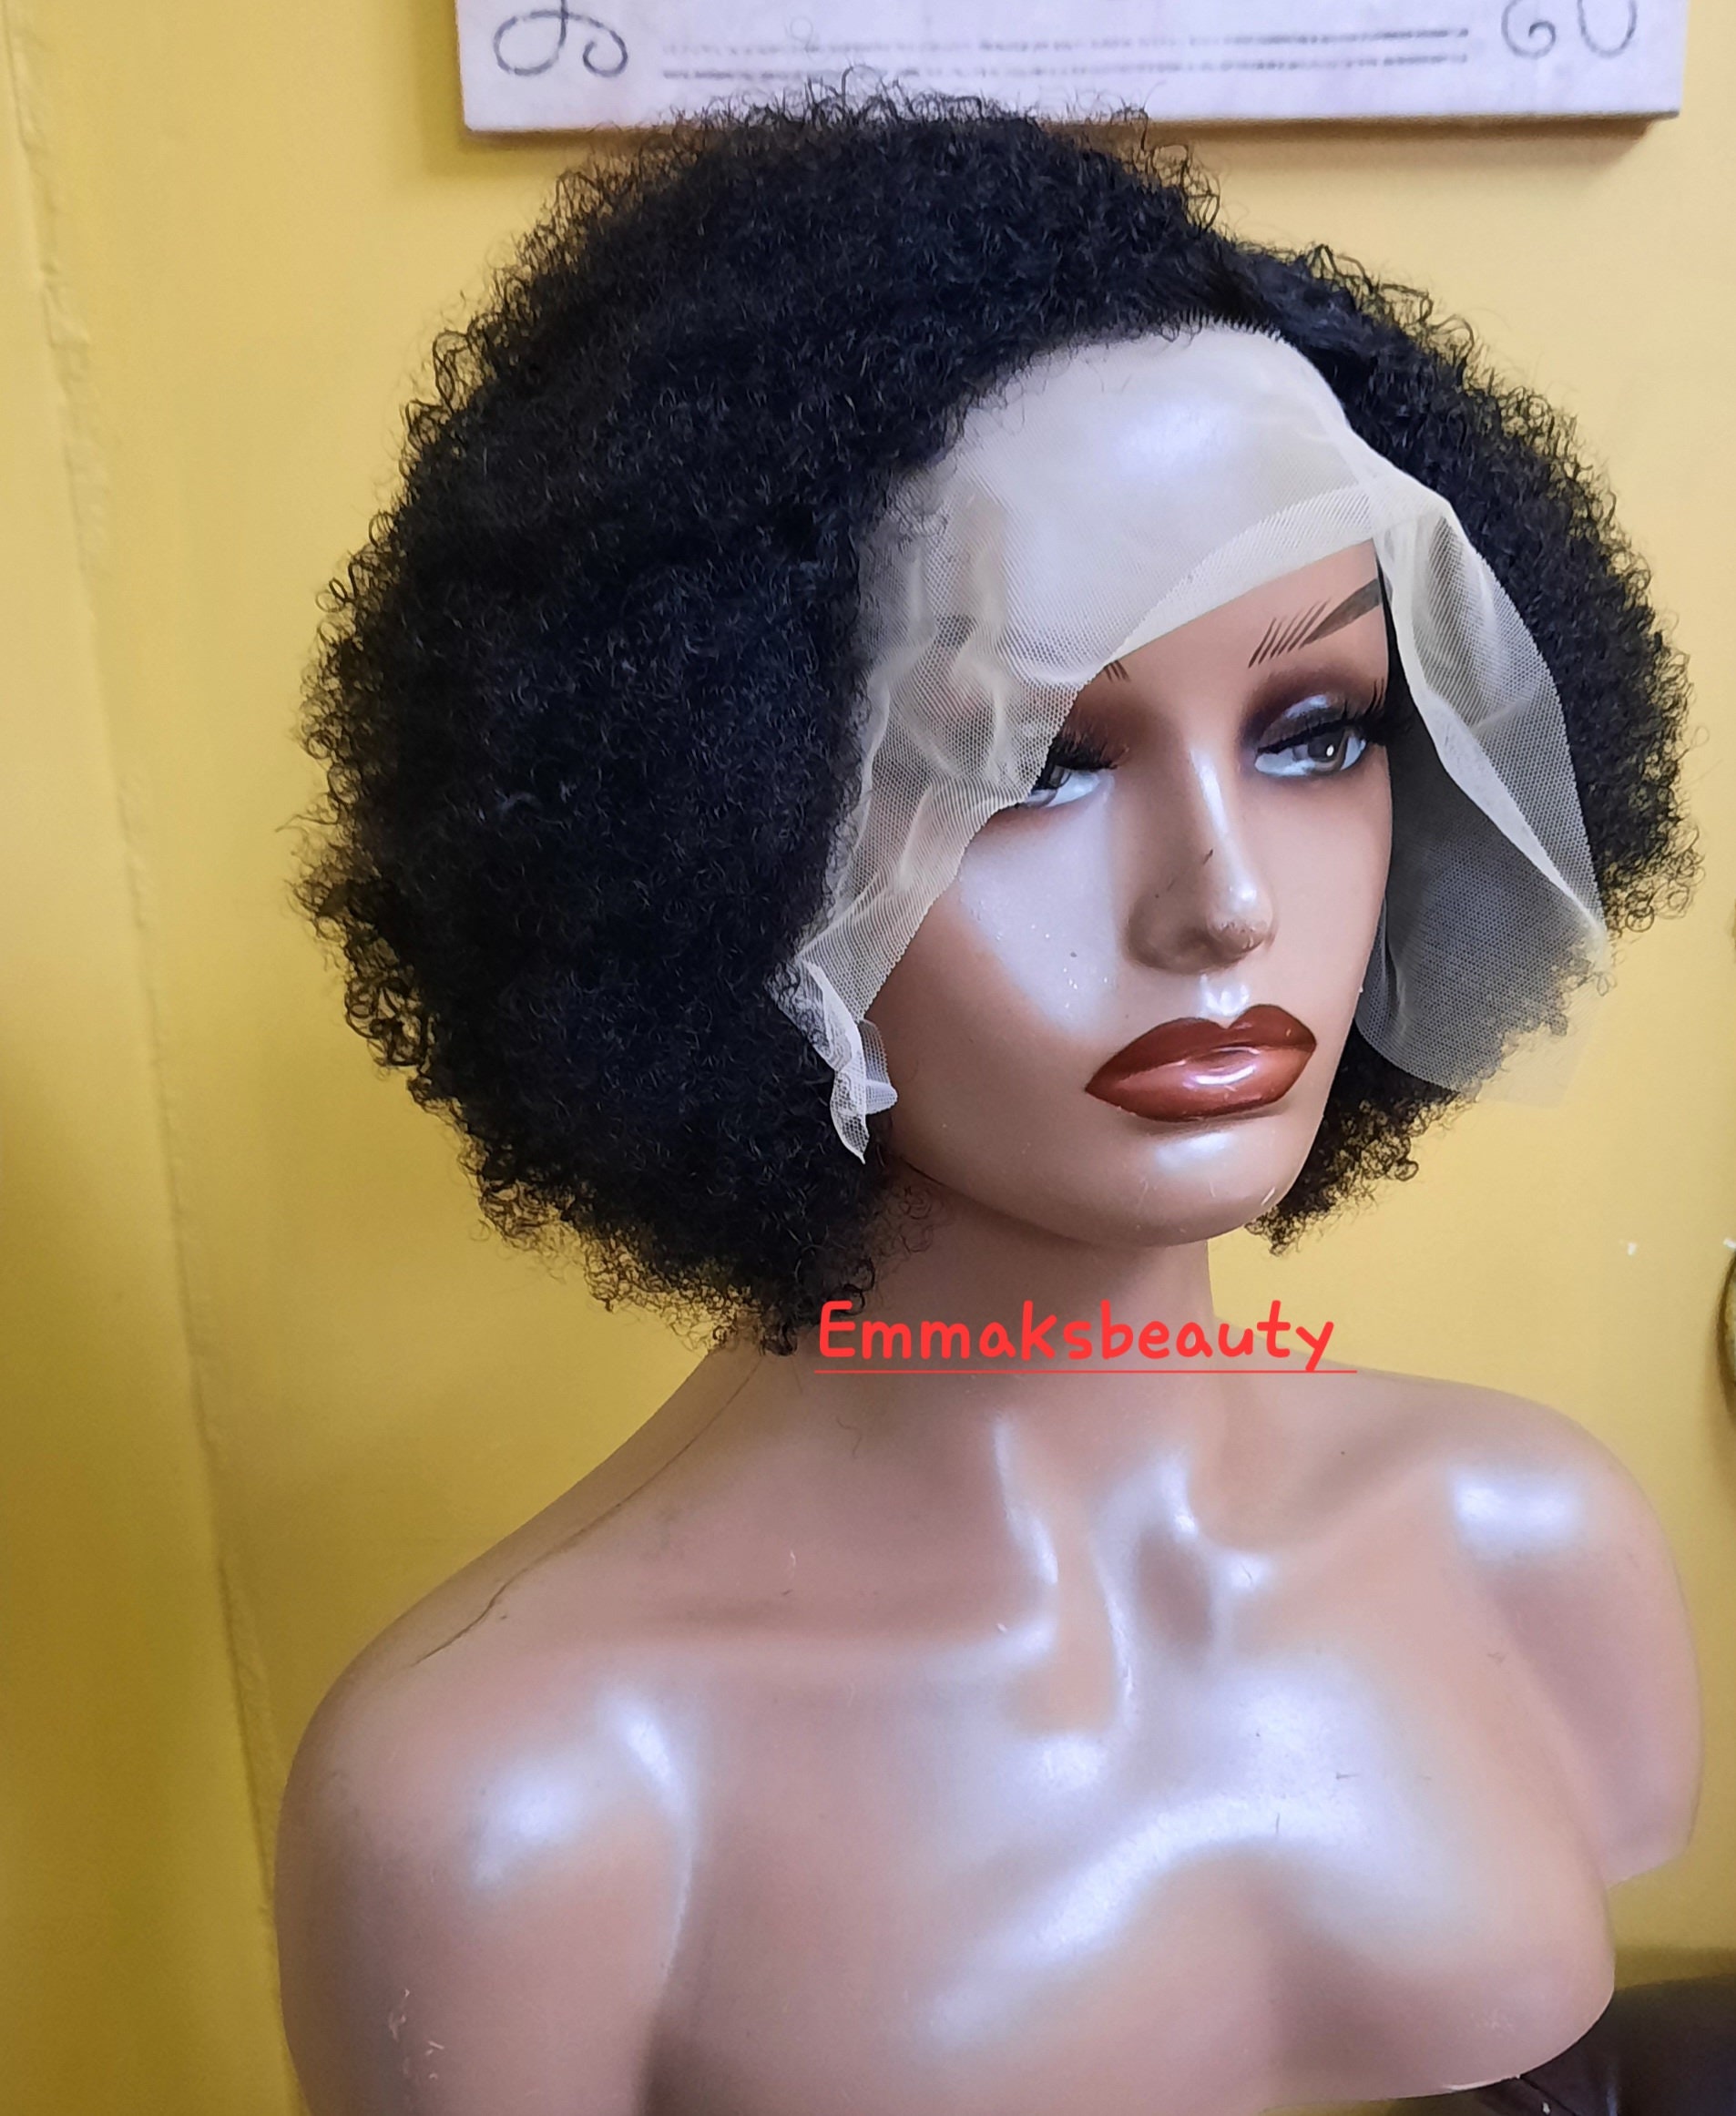 Pixie Afro Kinky Curly Wigs With Bangs Human Hair Afro Wigs for Black Women